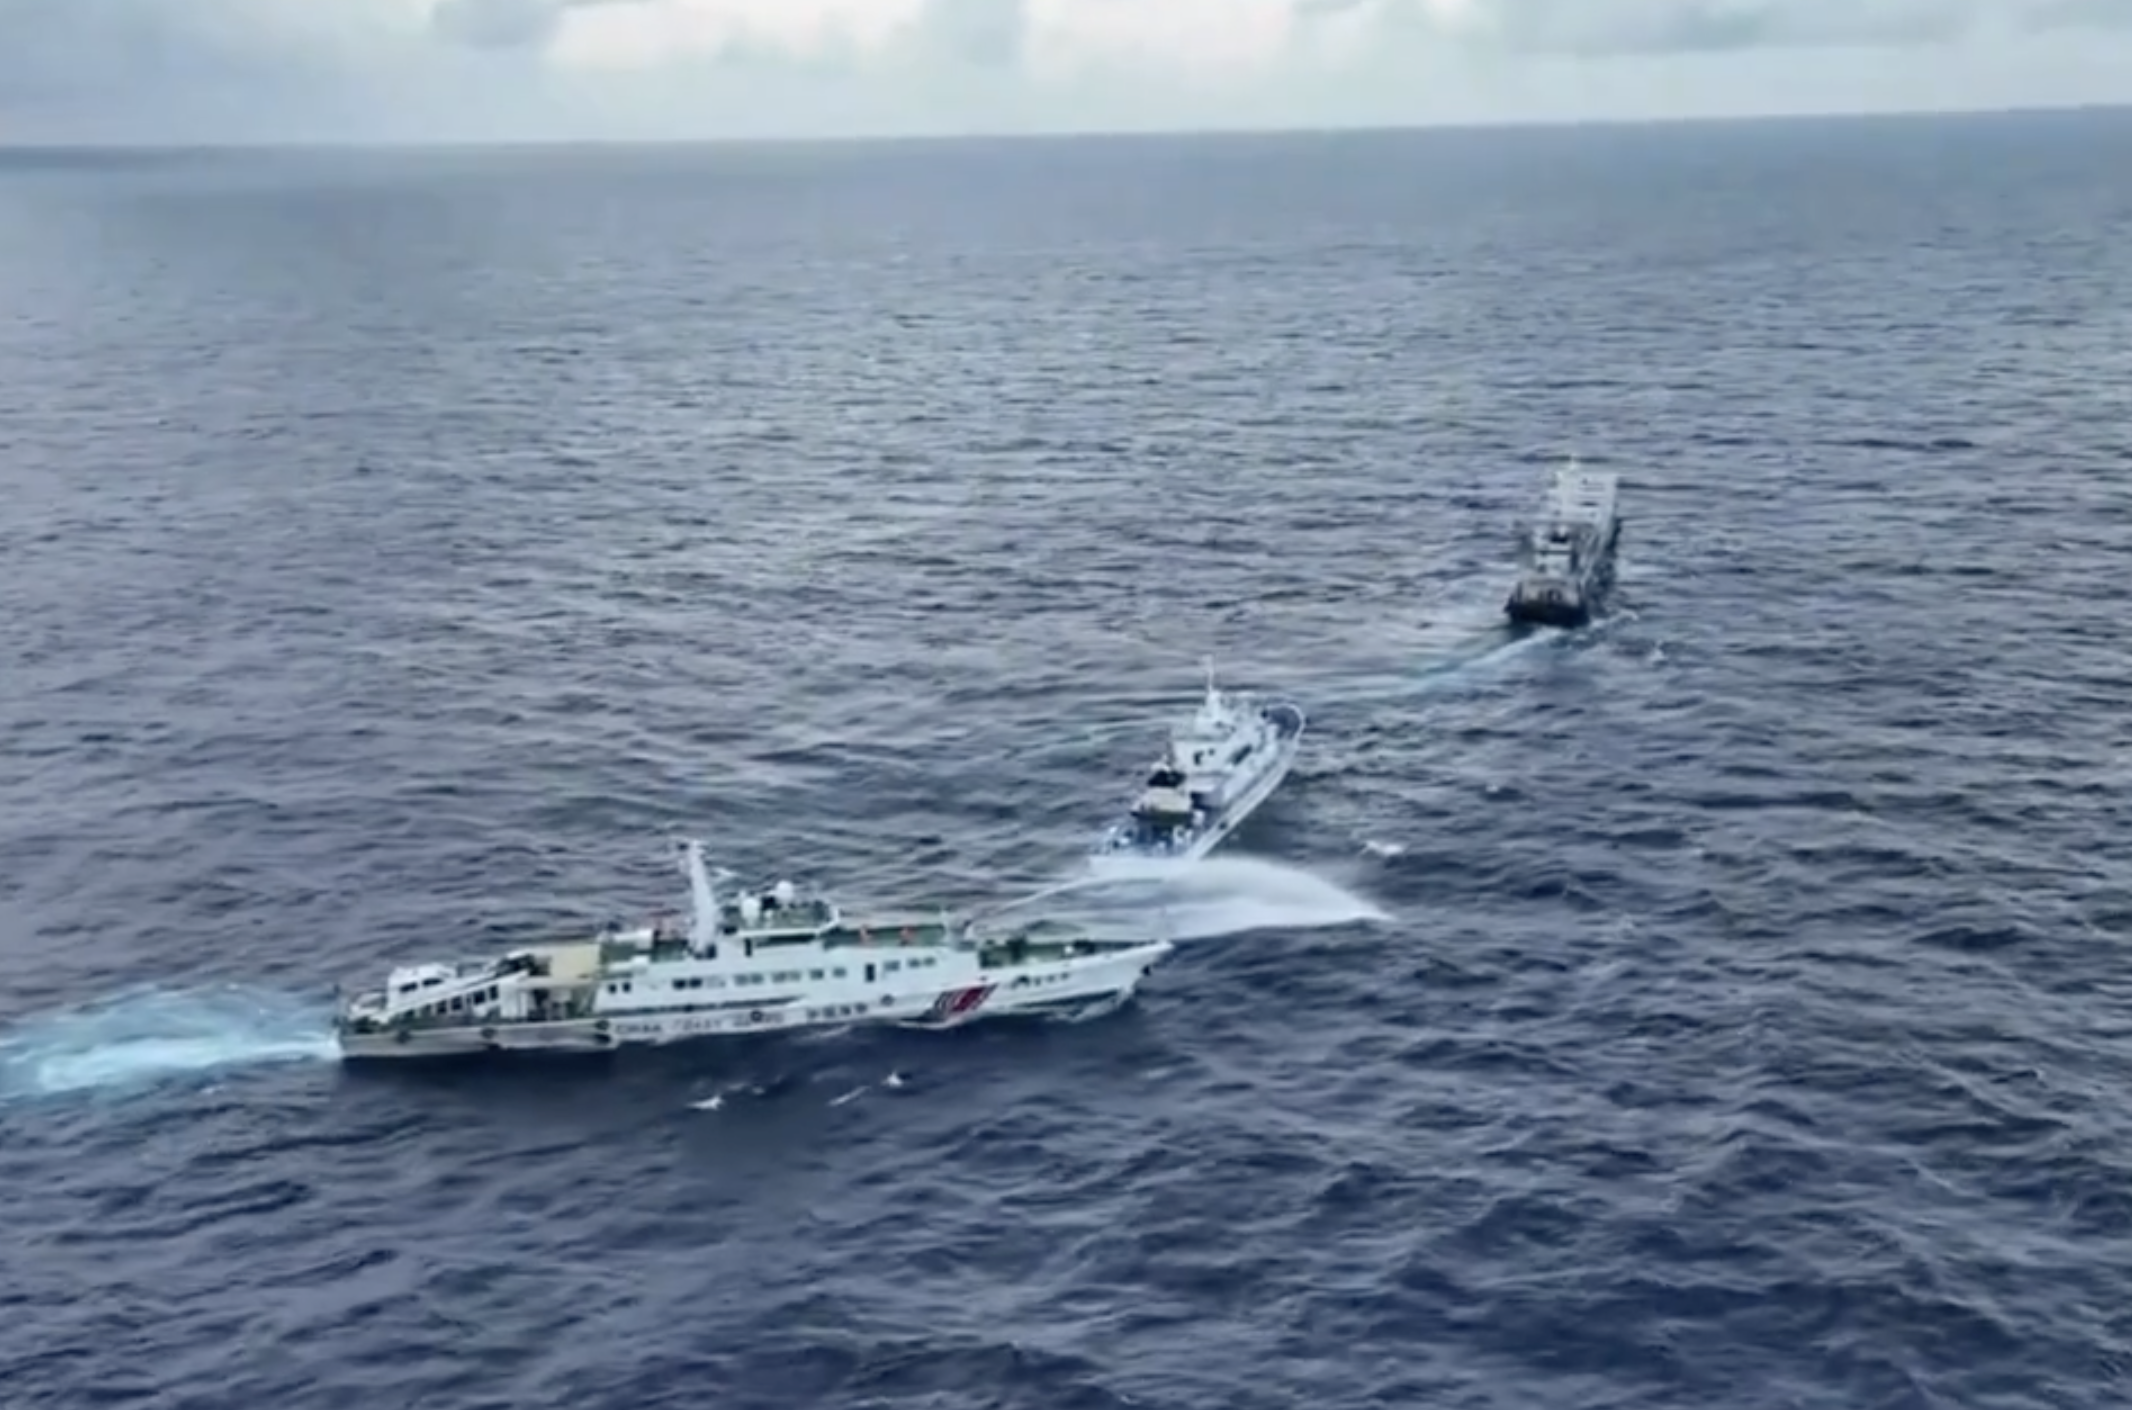 Chinese ships fire water cannon, ram Philippine vessels in contested waters